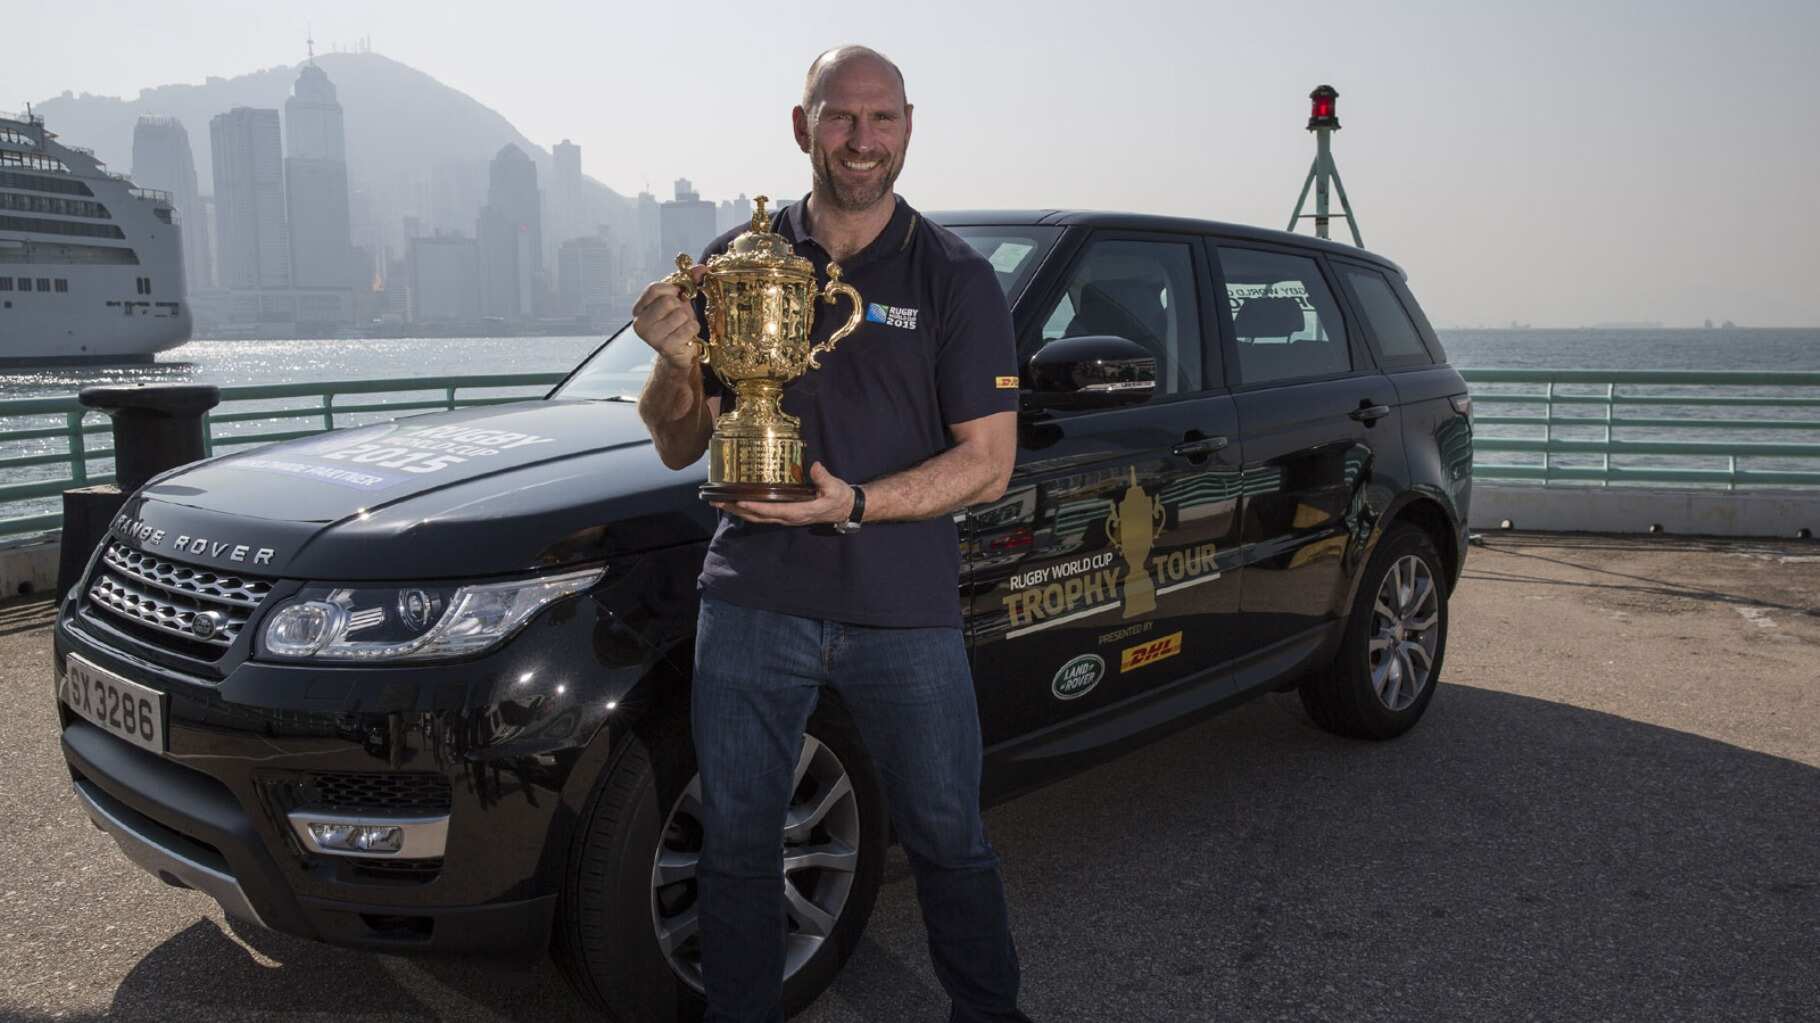 Rugby World Cup Trophy Tour in China (Hong Kong and Shanghai) 